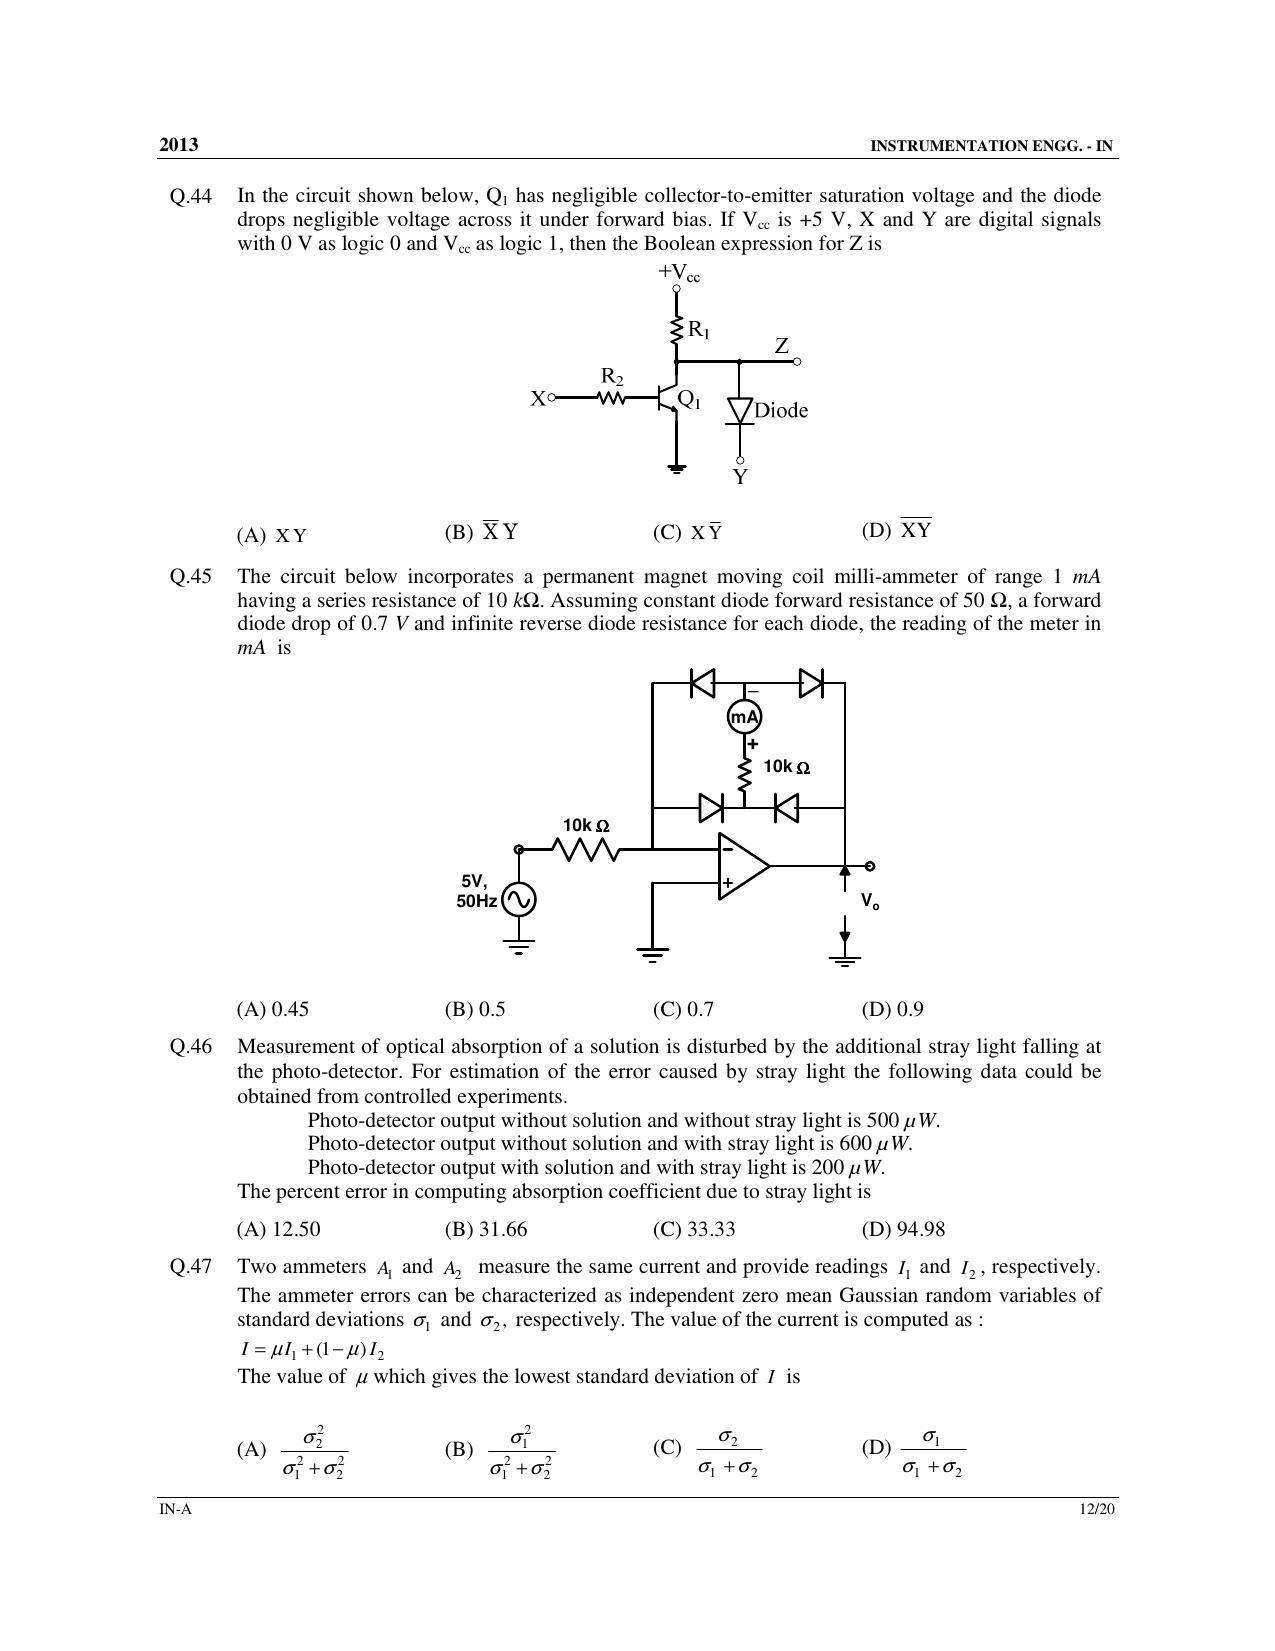 GATE 2013 Instrumentation Engineering (IN) Question Paper with Answer Key - Page 13